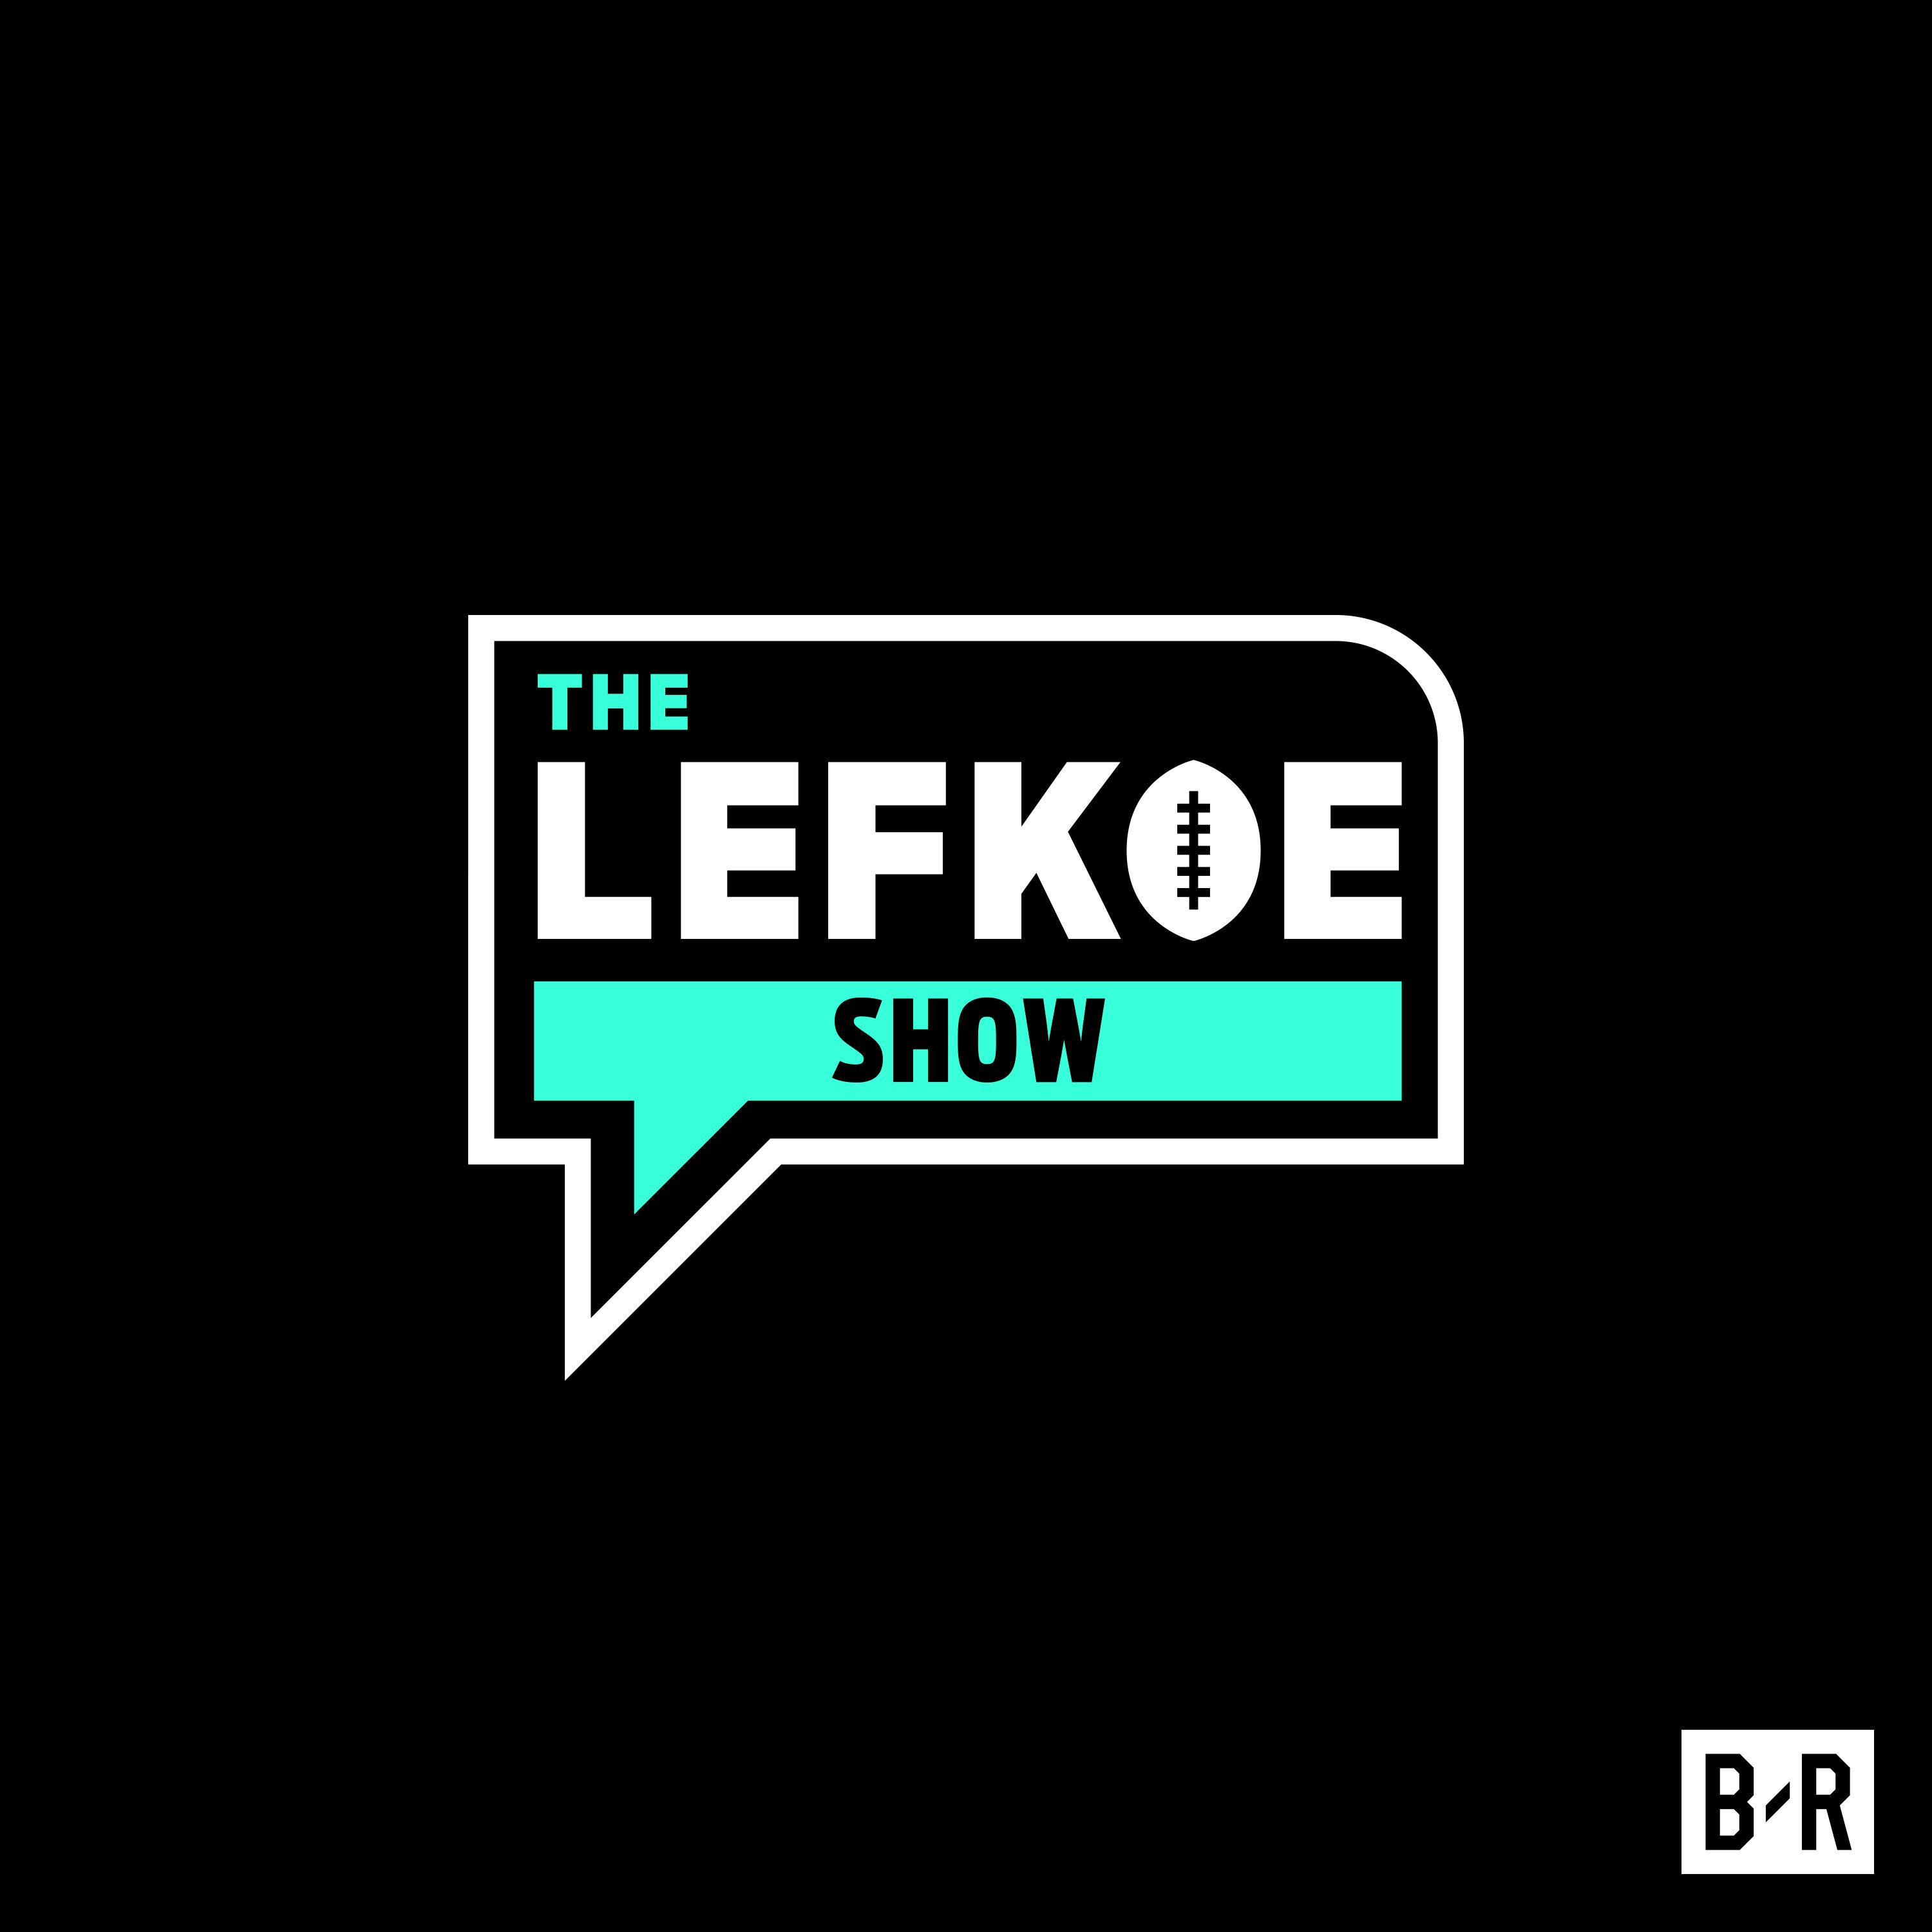 Allen Robinson on Playoff Mentality, Staying Motivated, and His Starting 5 of WRs | The Lefkoe Show